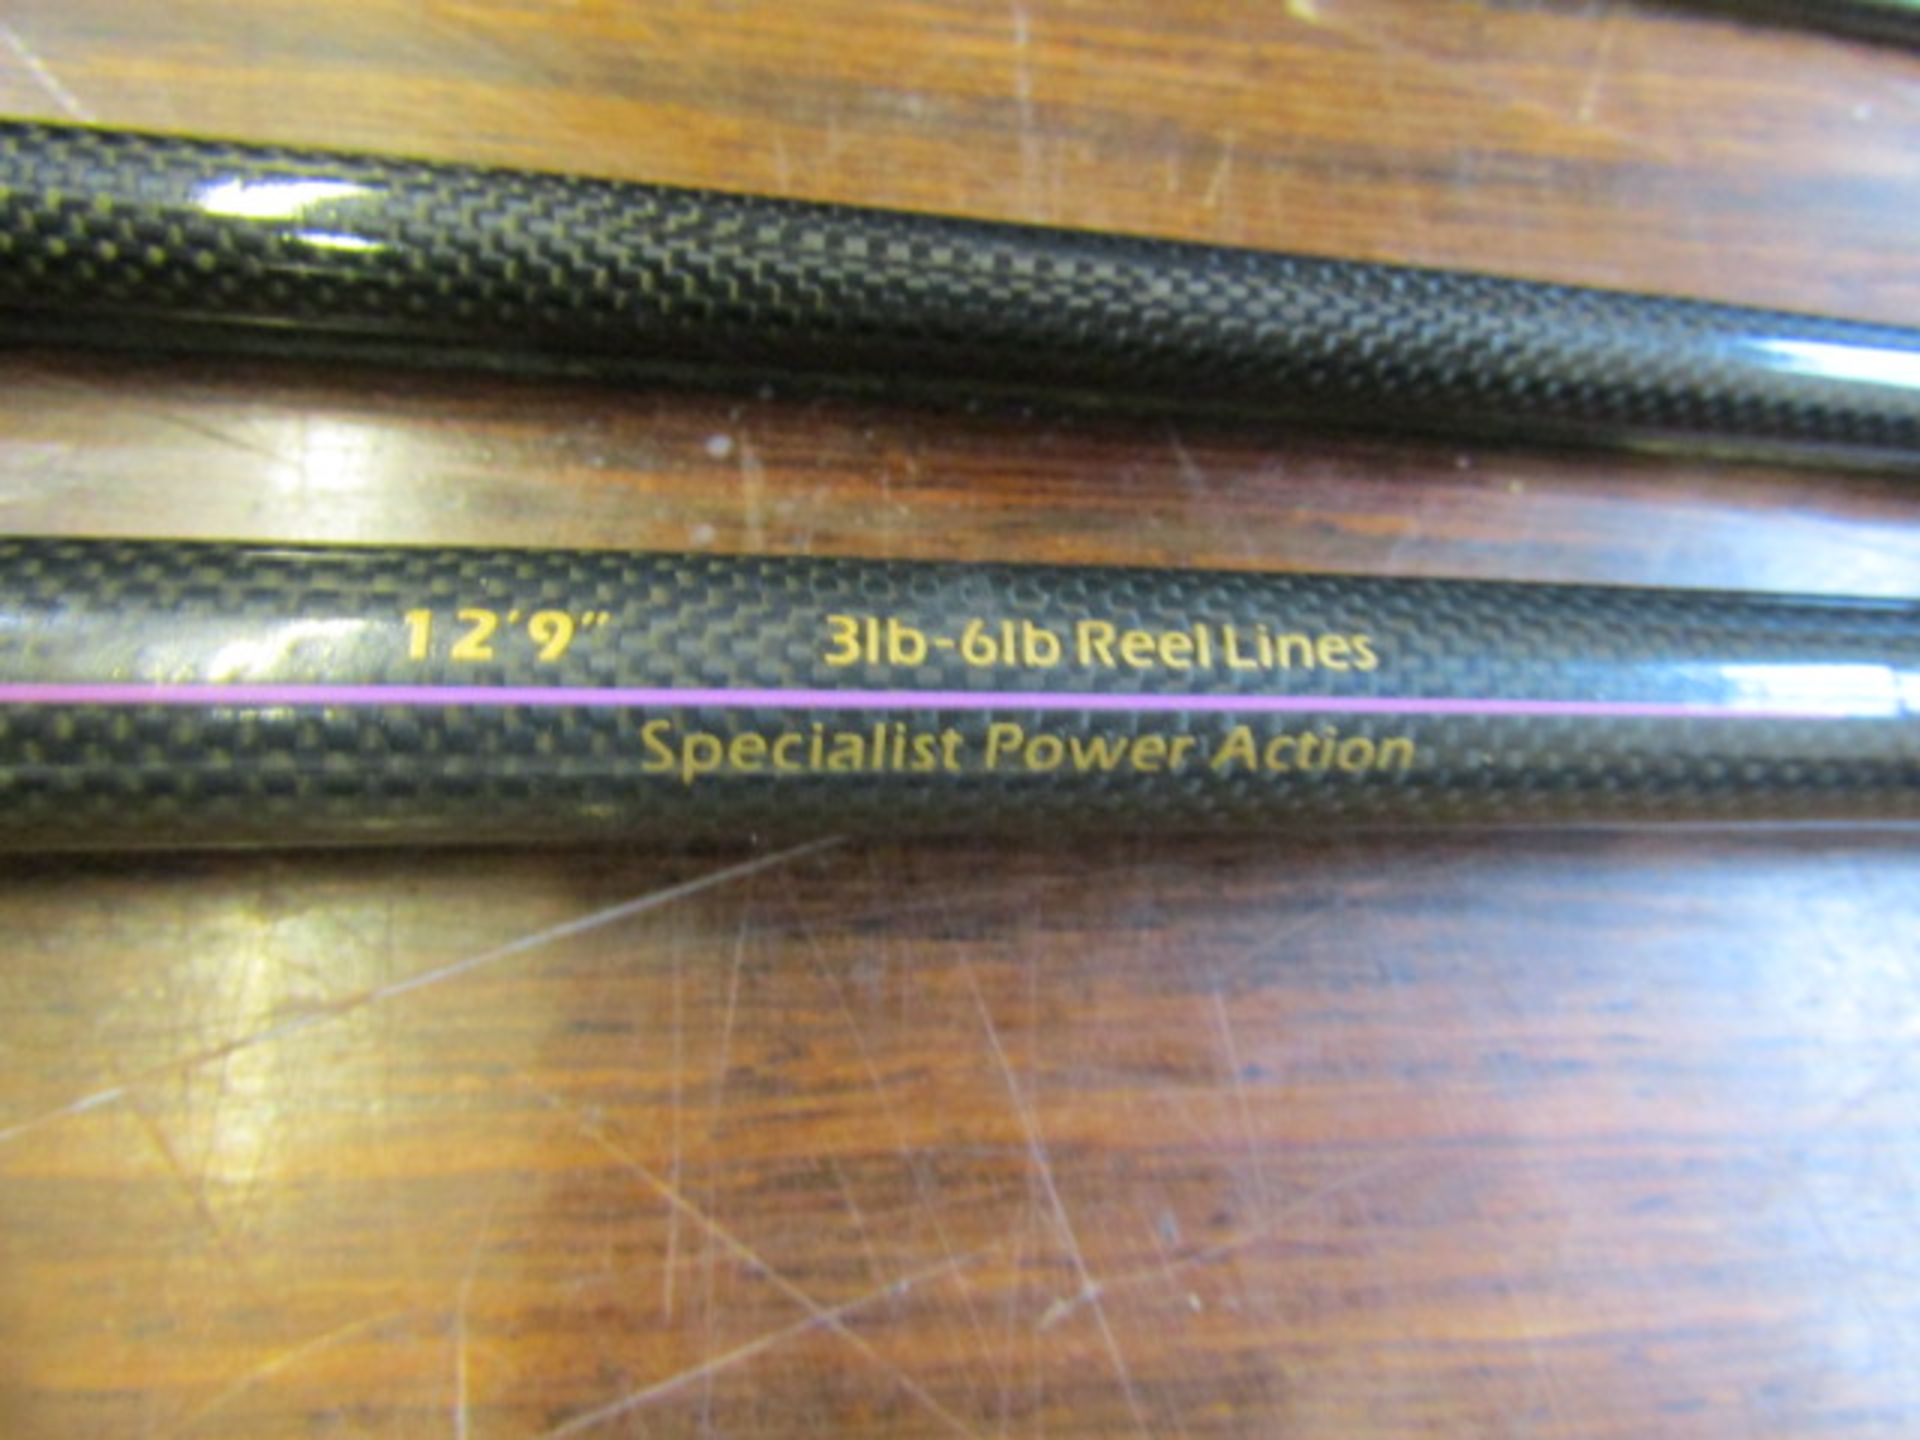 Drennan tench float rod 12' 9" with canvas and hard tube case - Image 4 of 8